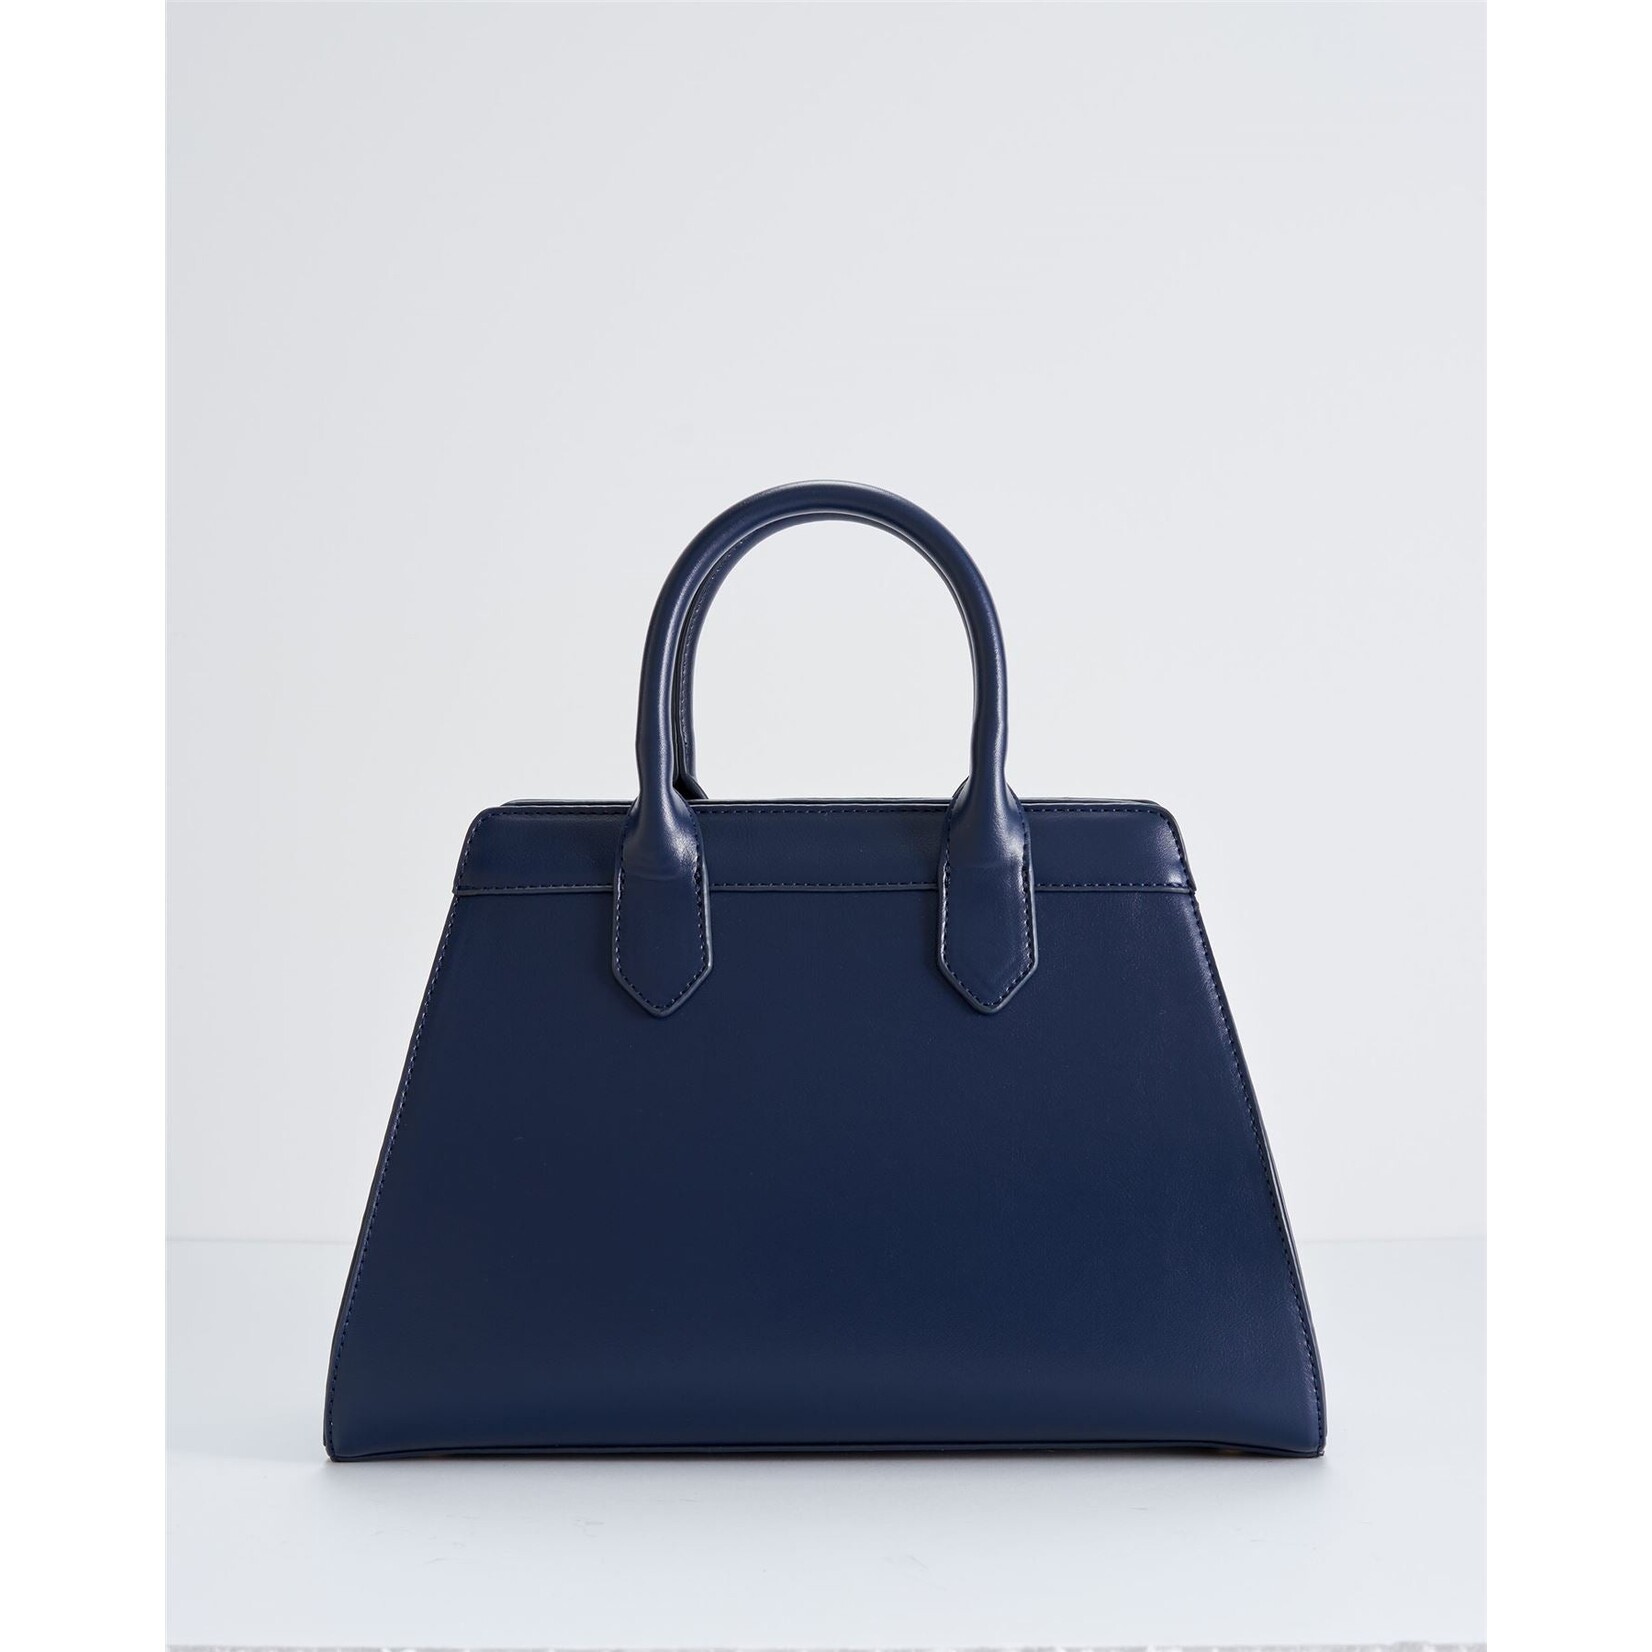 Fable England Royal Ditsy Tote Navy